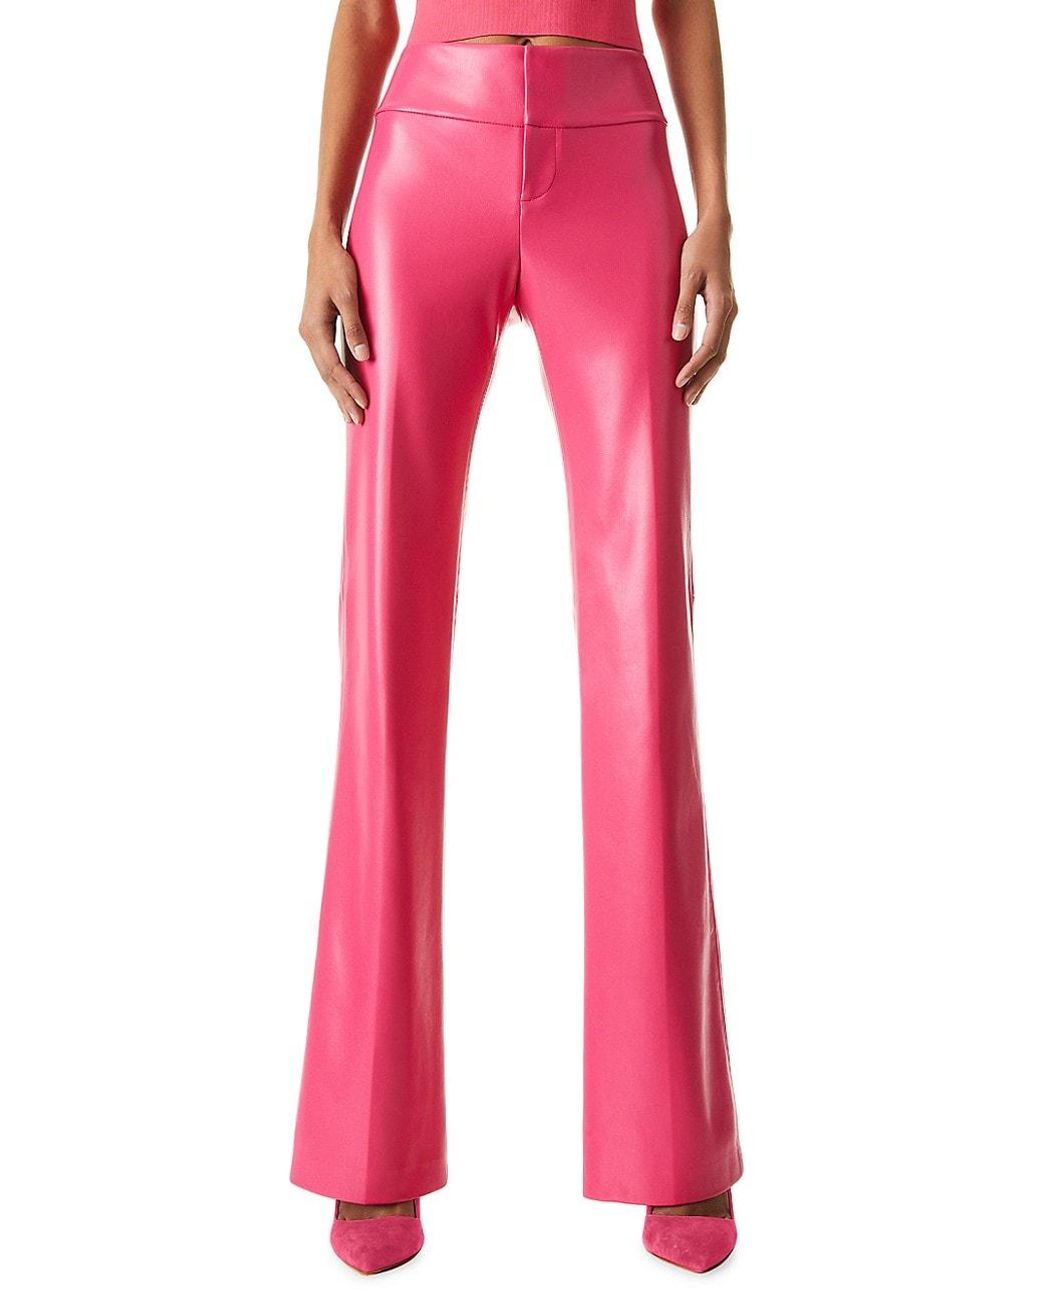 Alice + Olivia Marshall Faux Leather Flare Pants in Pink | Lyst